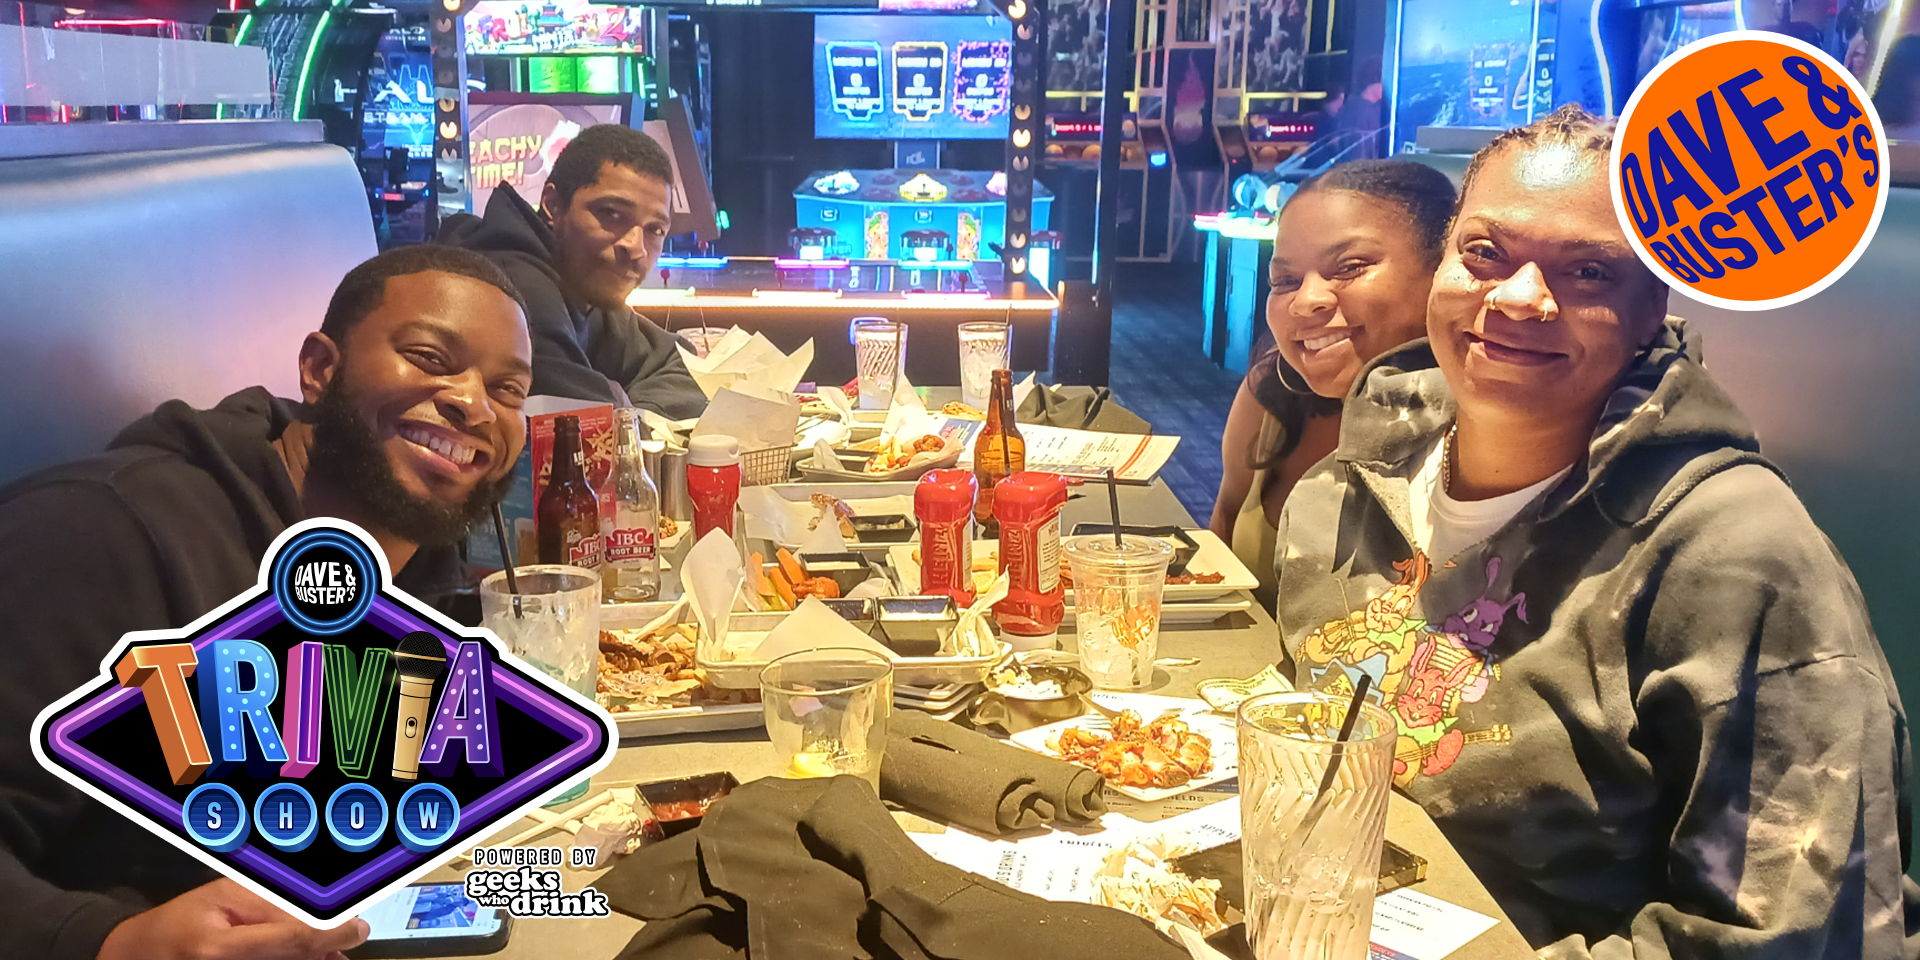 Geeks Who Drink Trivia Night at Dave and Buster's - Massapequa promotional image